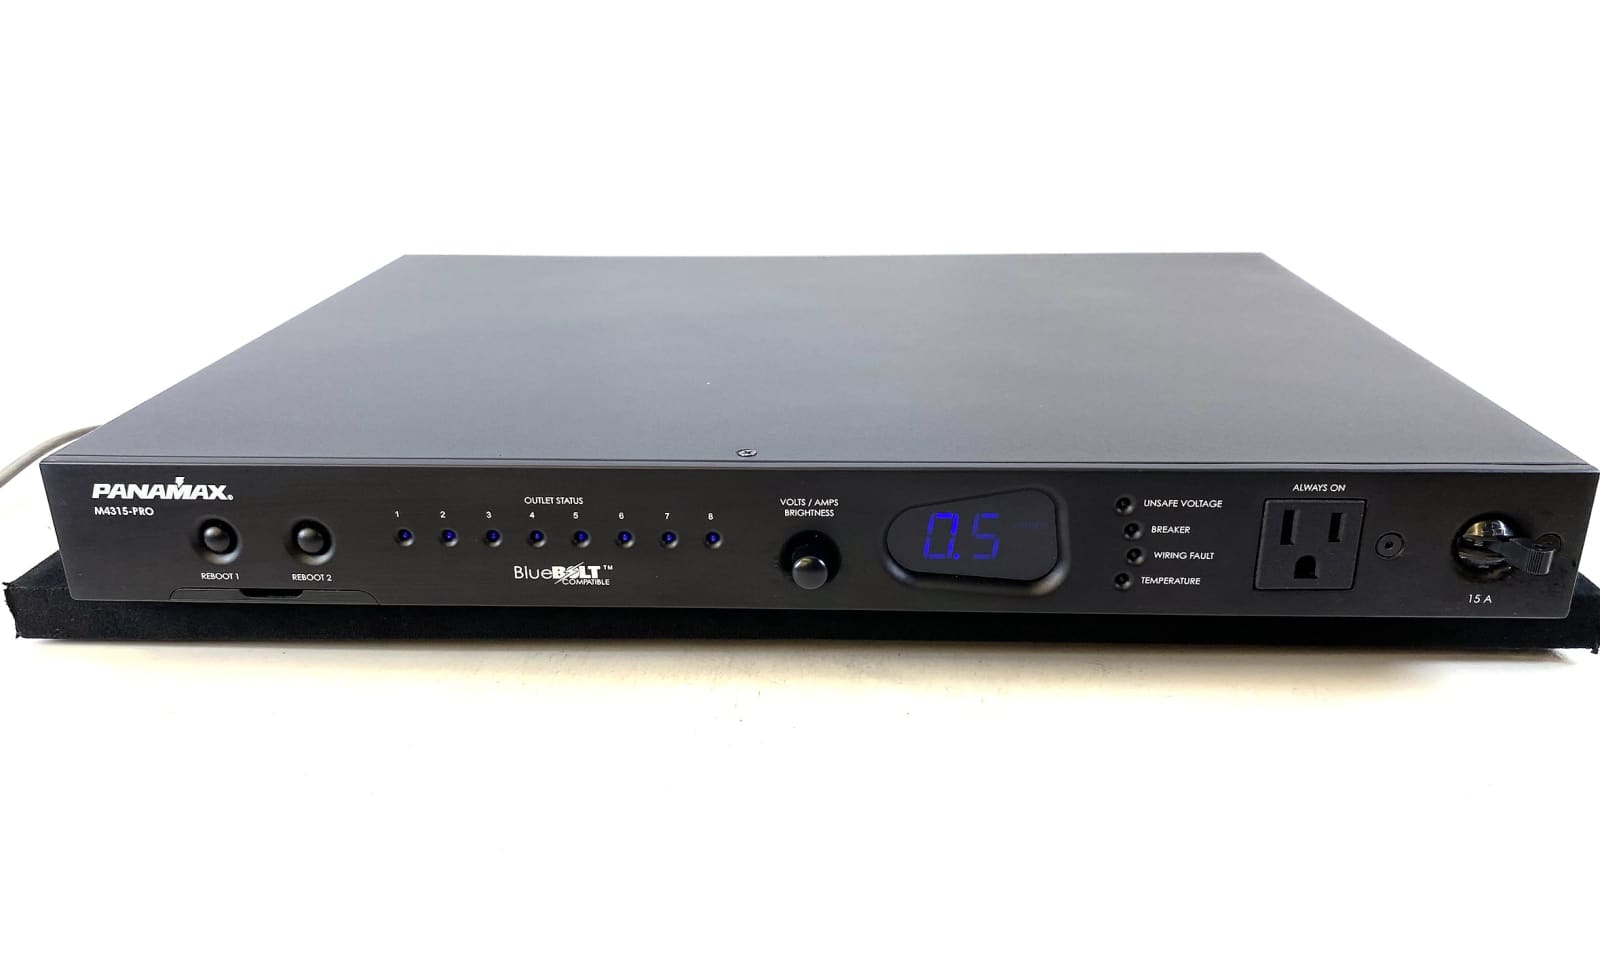 Panamax 4315-Pro Power Conditioner And Controller Bluebolt Capable Included